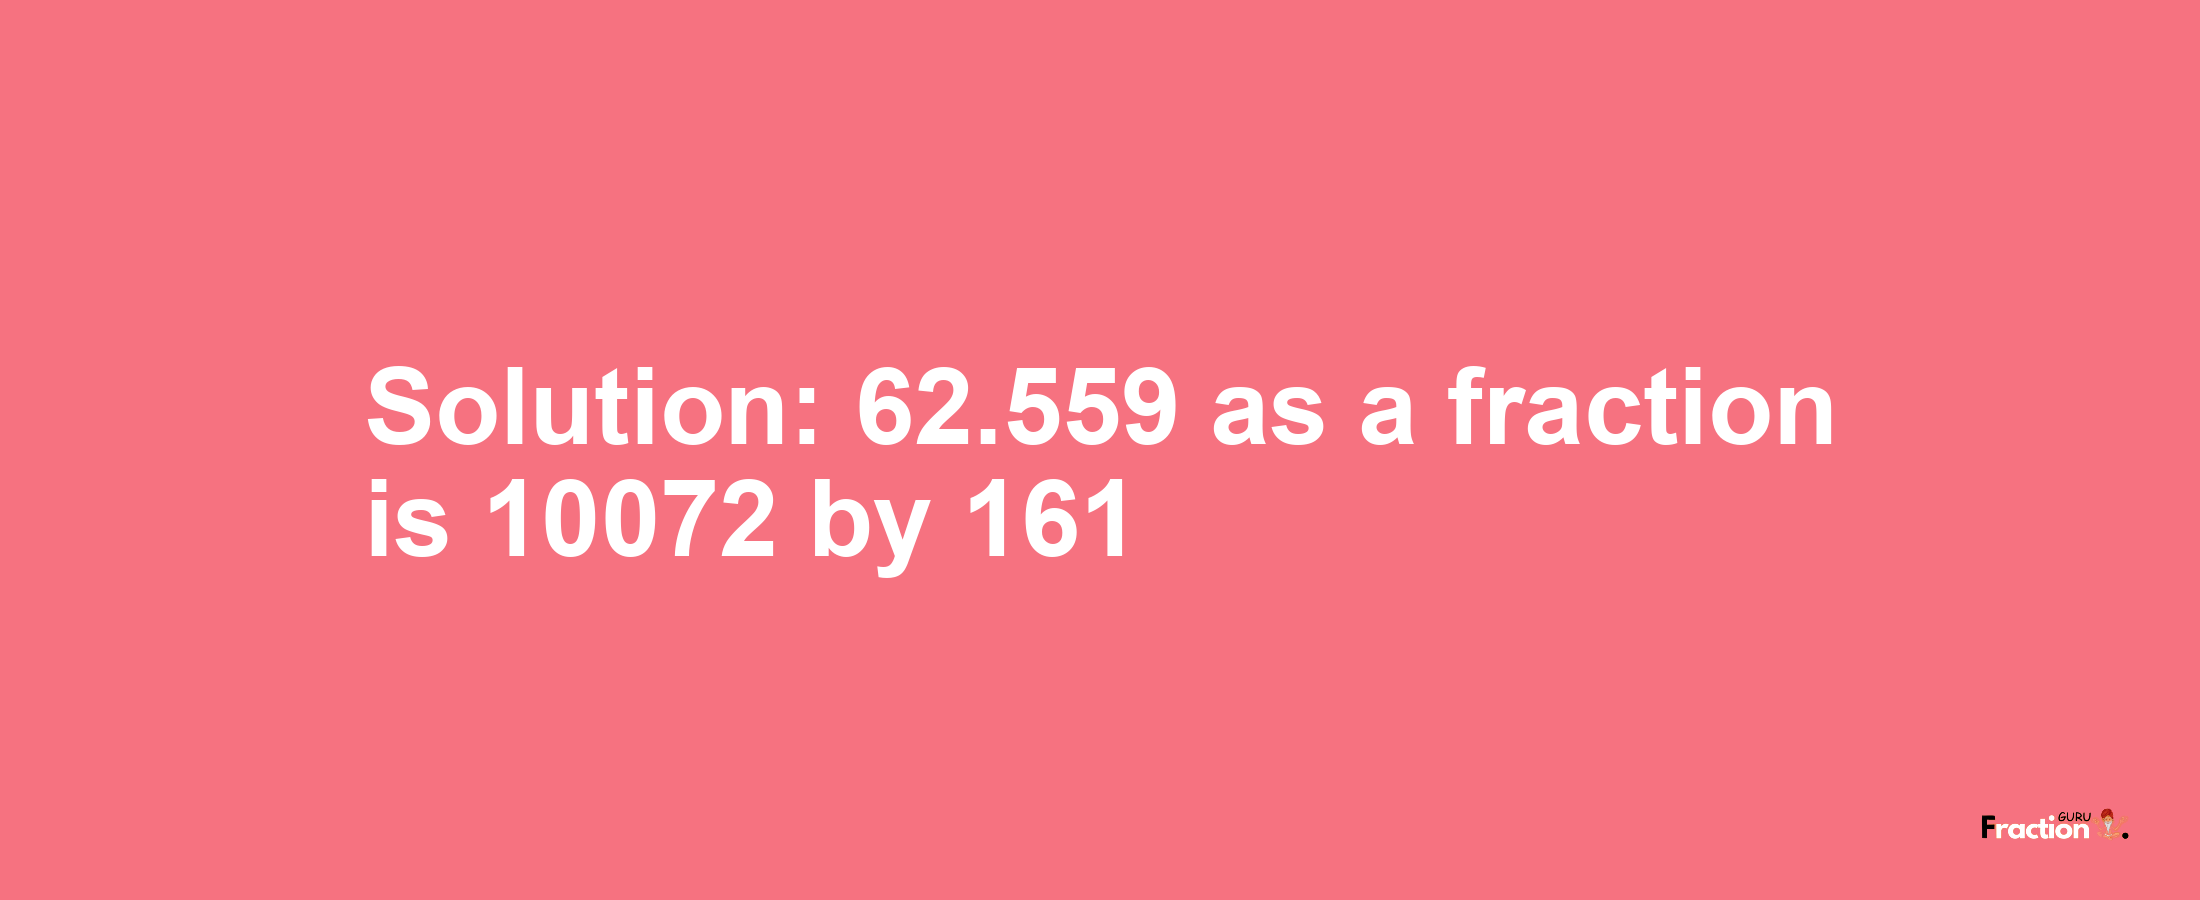 Solution:62.559 as a fraction is 10072/161